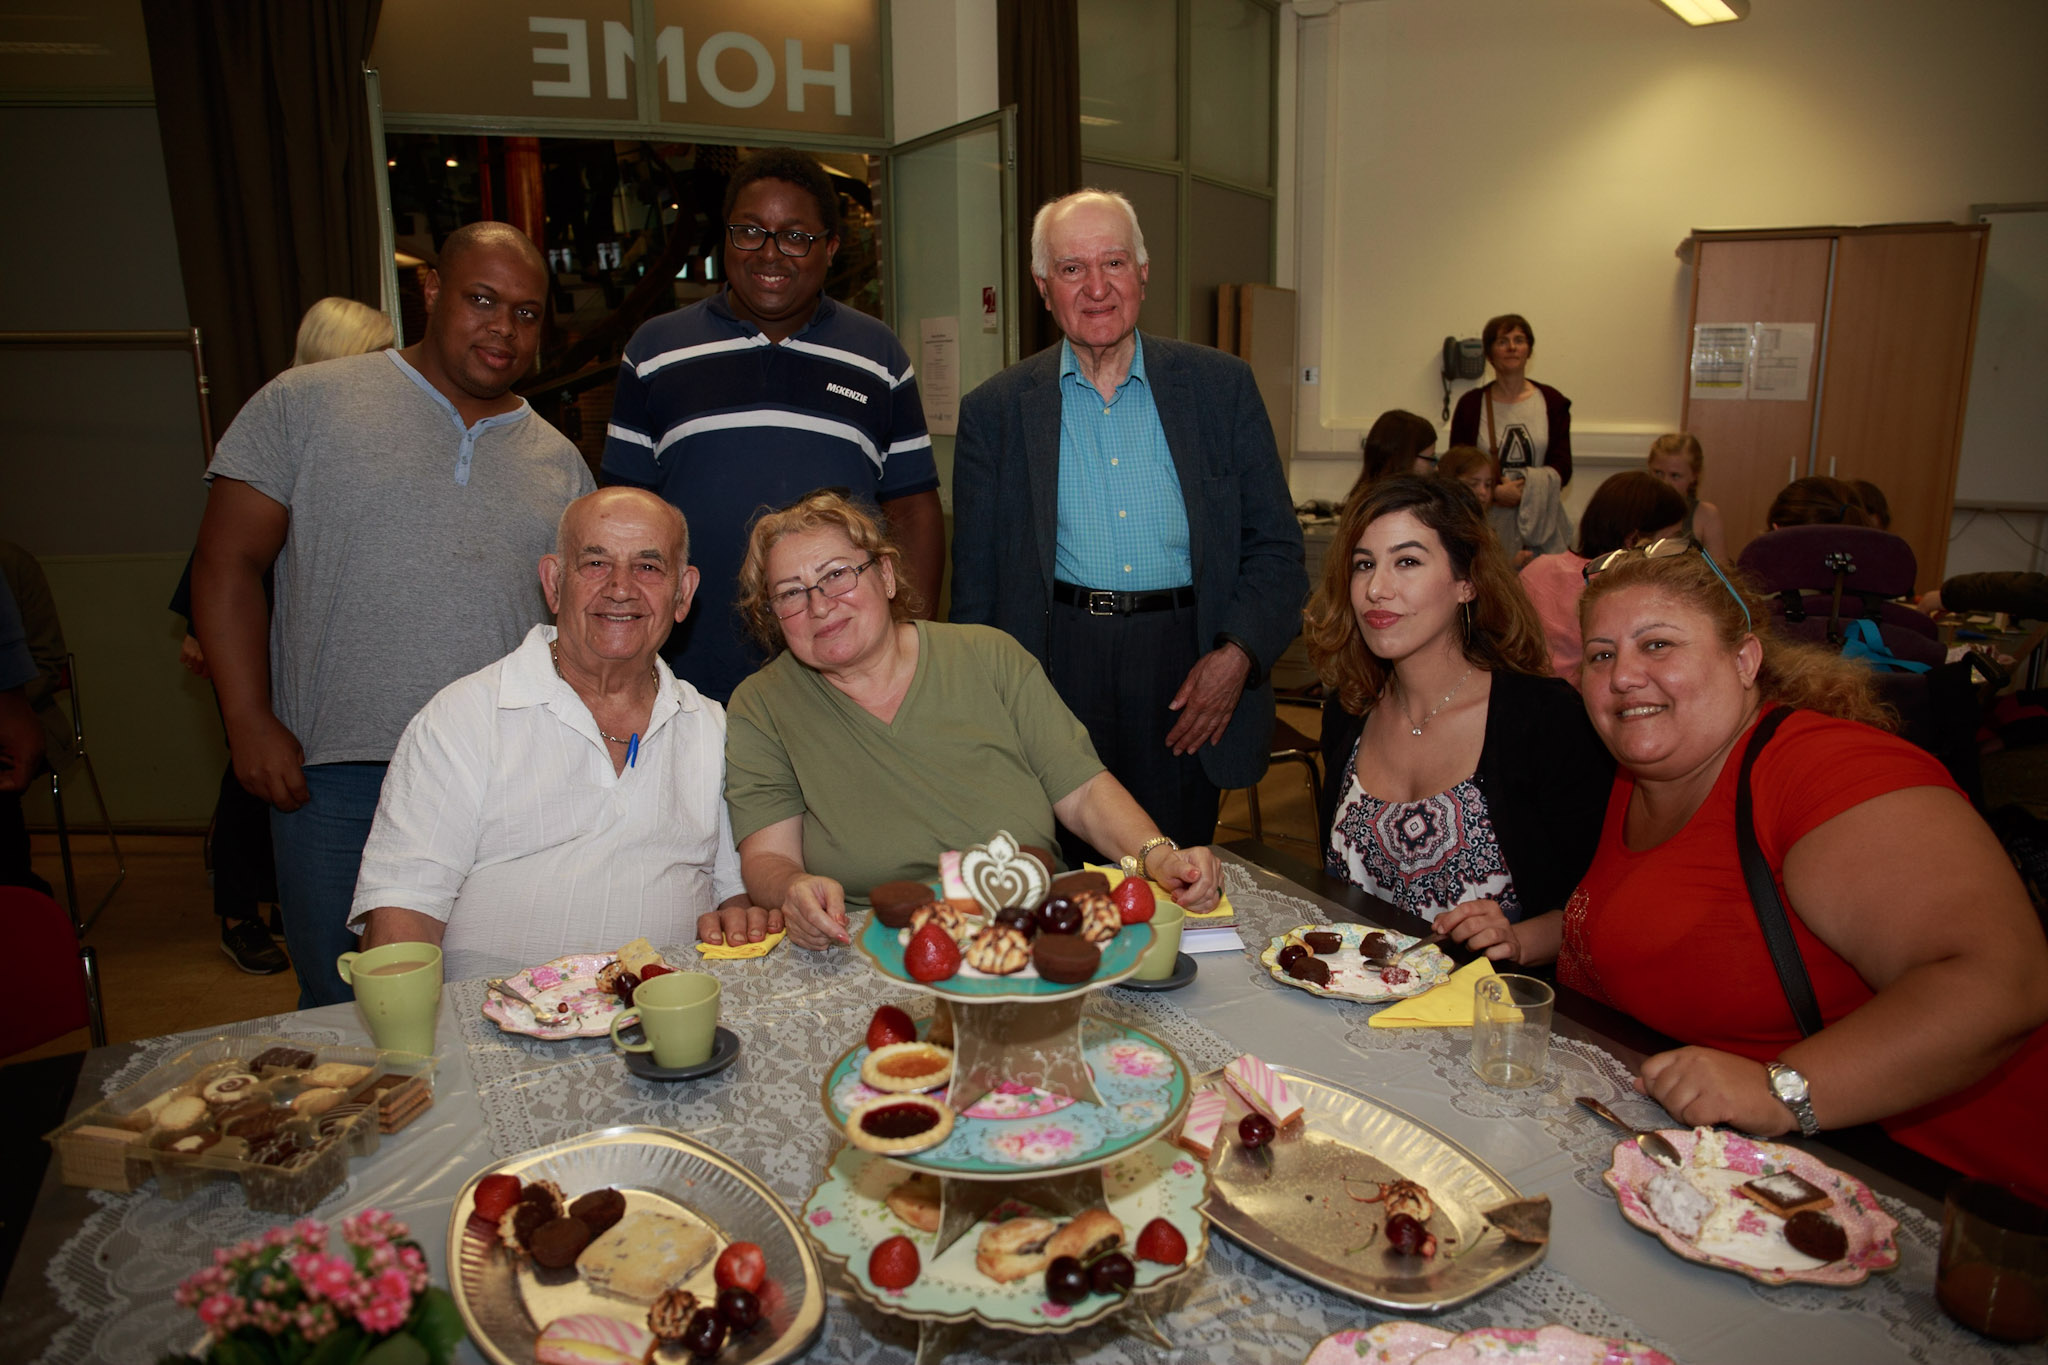 Local residents enjoyed tea and cake at the final indoor street party of the 'Home City Street' project.